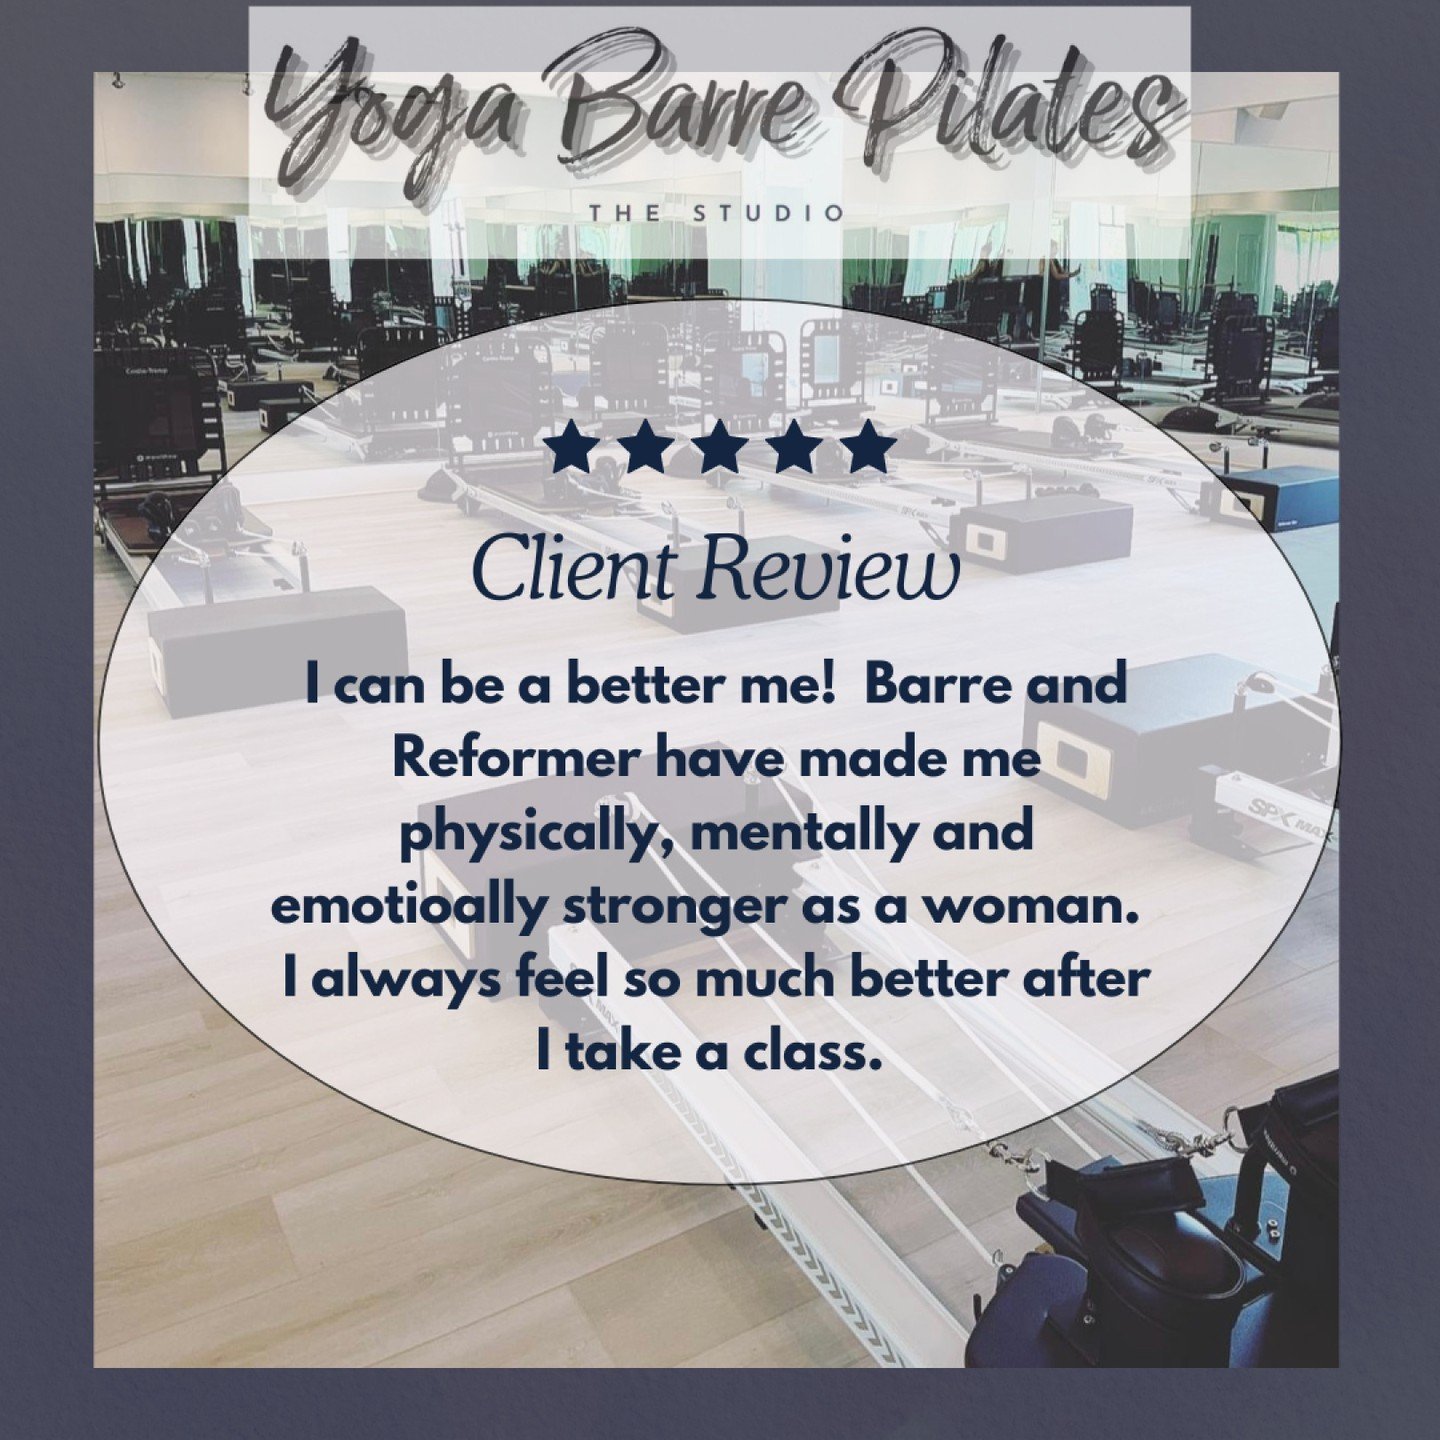 The Yoga Barre Pilates Studio has the perfect combination of Yoga, Barre and Reformer Pilates classes to challenge your body and leave you feeling energized. Experience the benefits of our personalized attention and support from our experienced instr